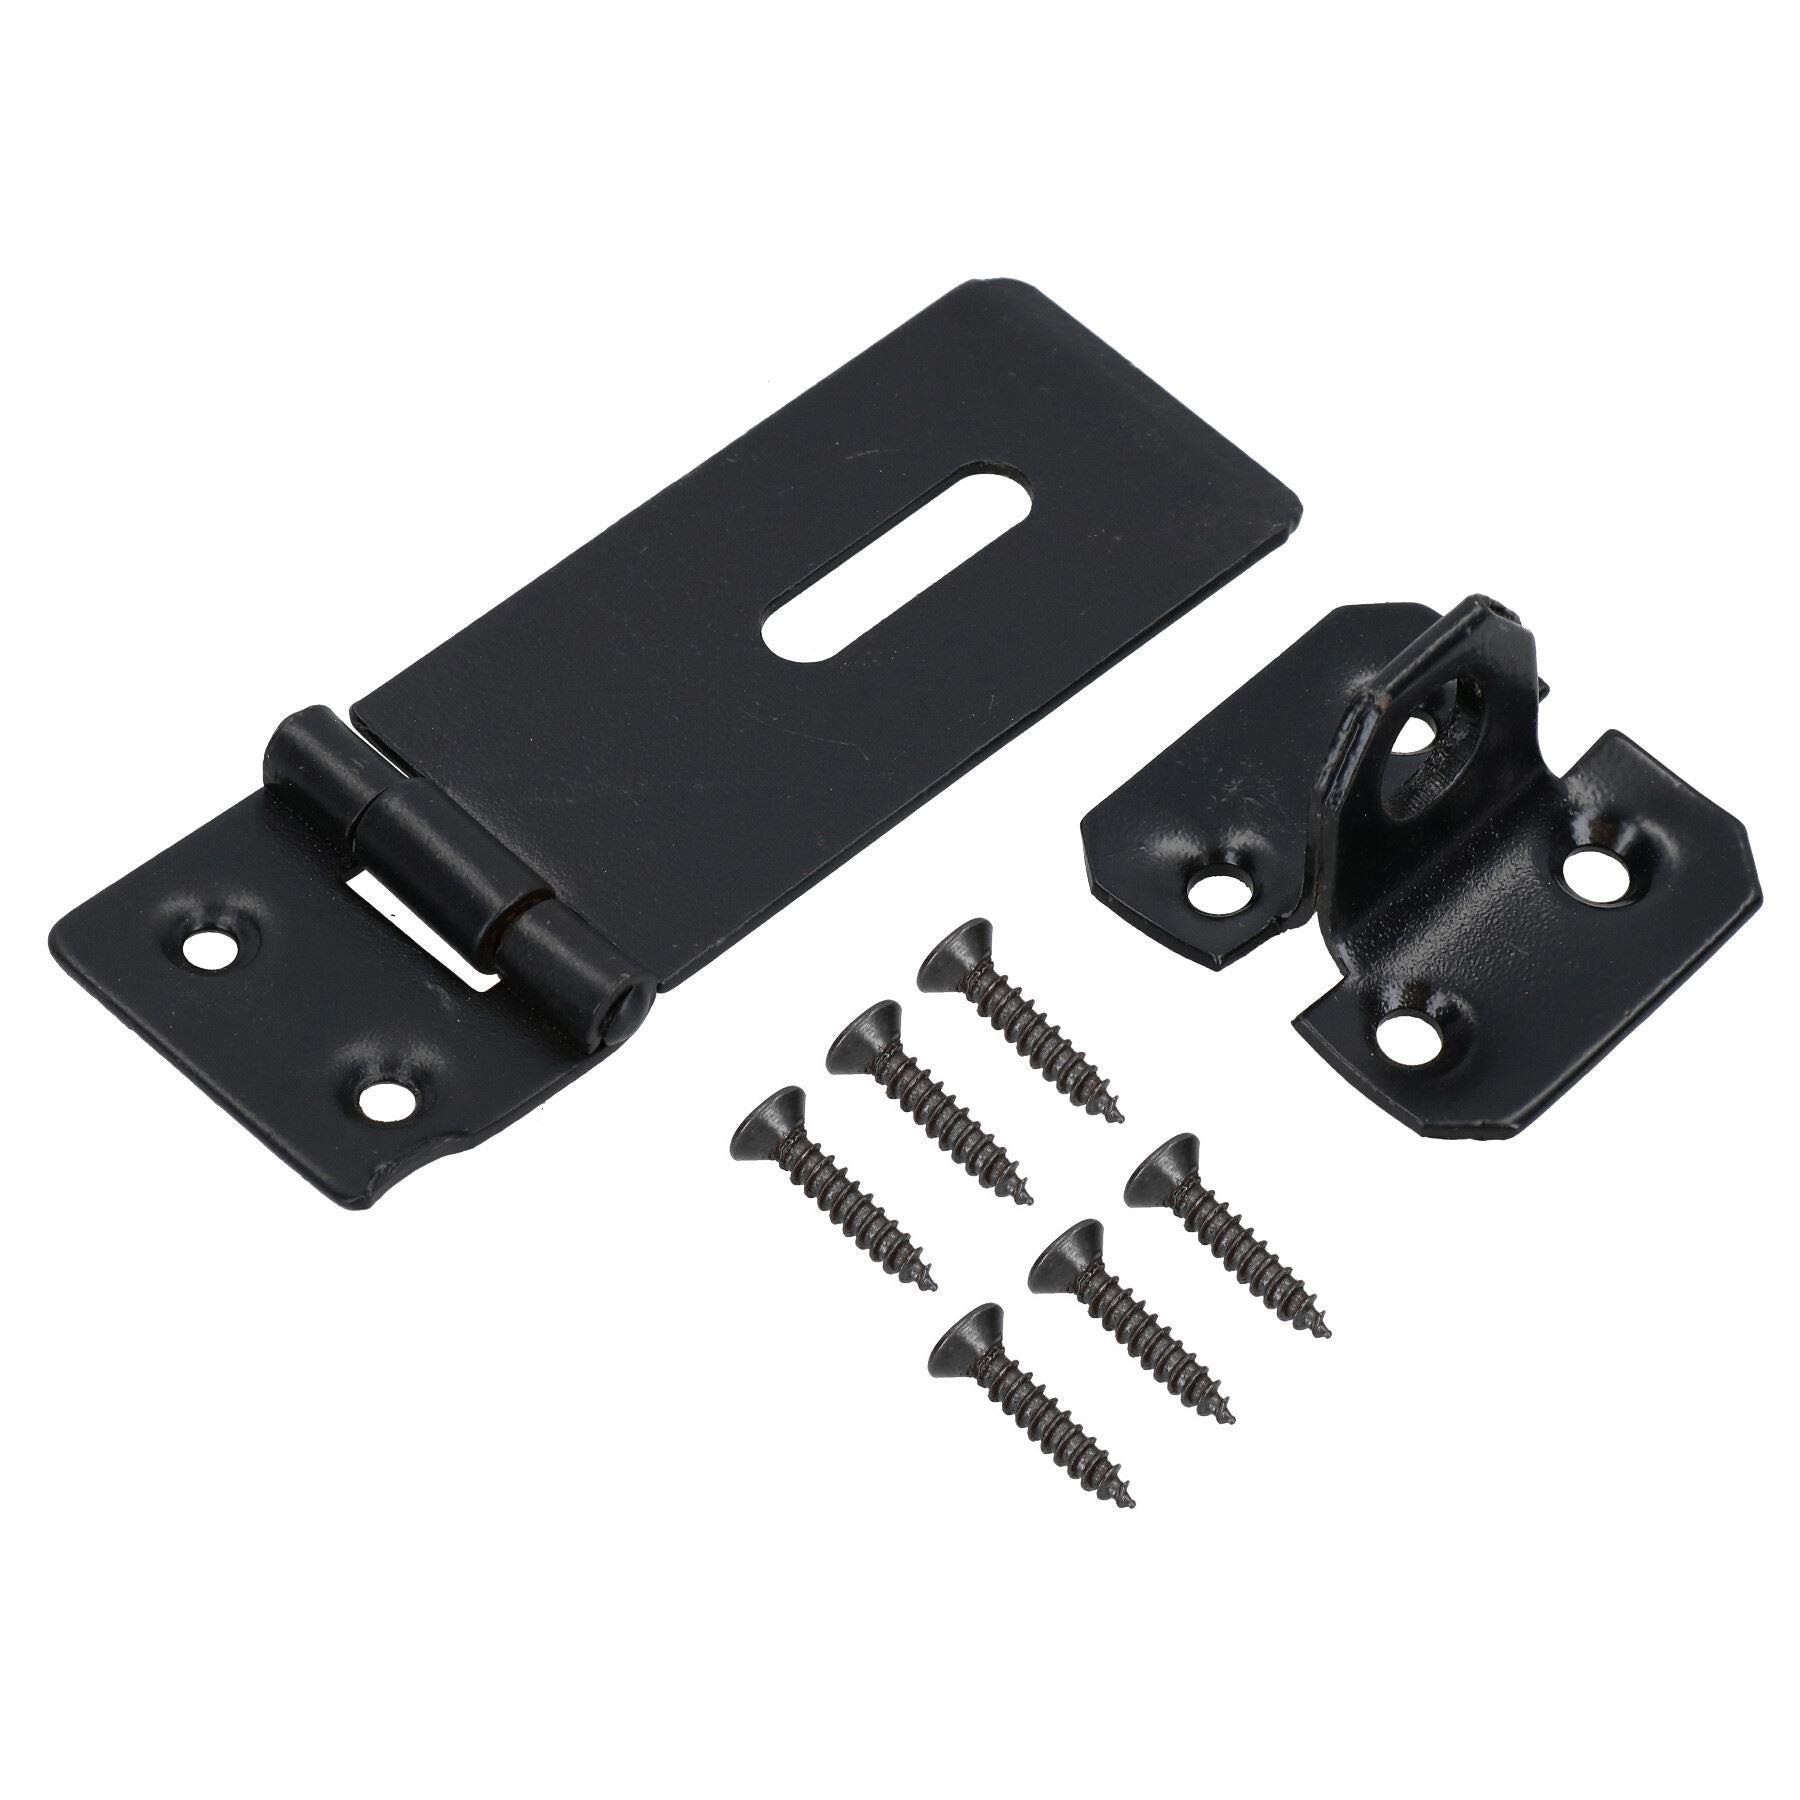 3” (75mm) heavy Duty Safety Hasp and Staple Security Lock for Gates Sheds Doors